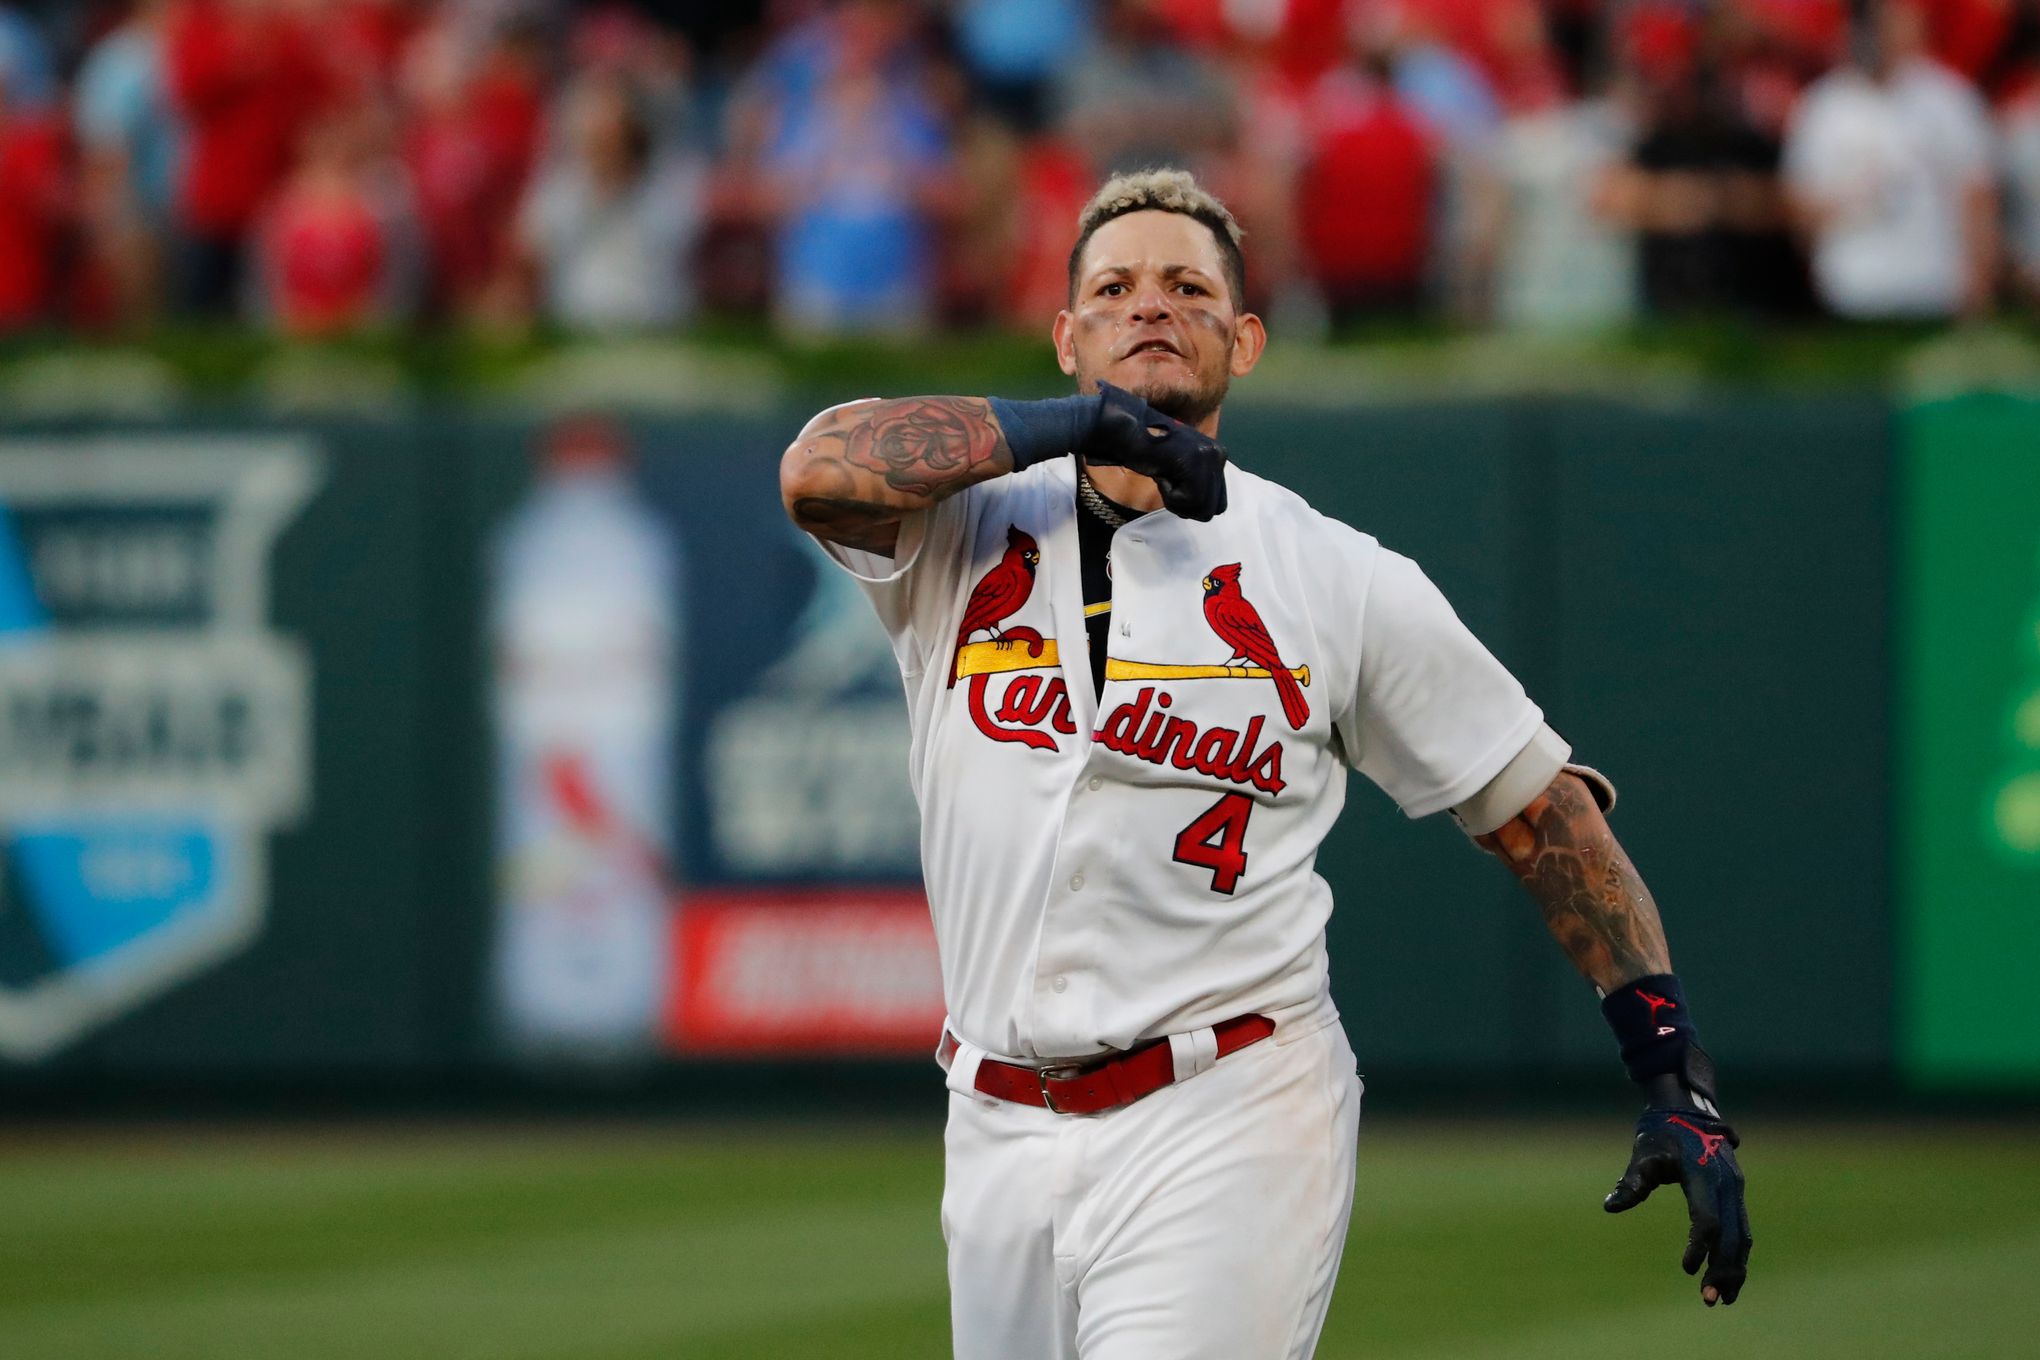 Washington Nationals: Yadier Molina is not the answer either